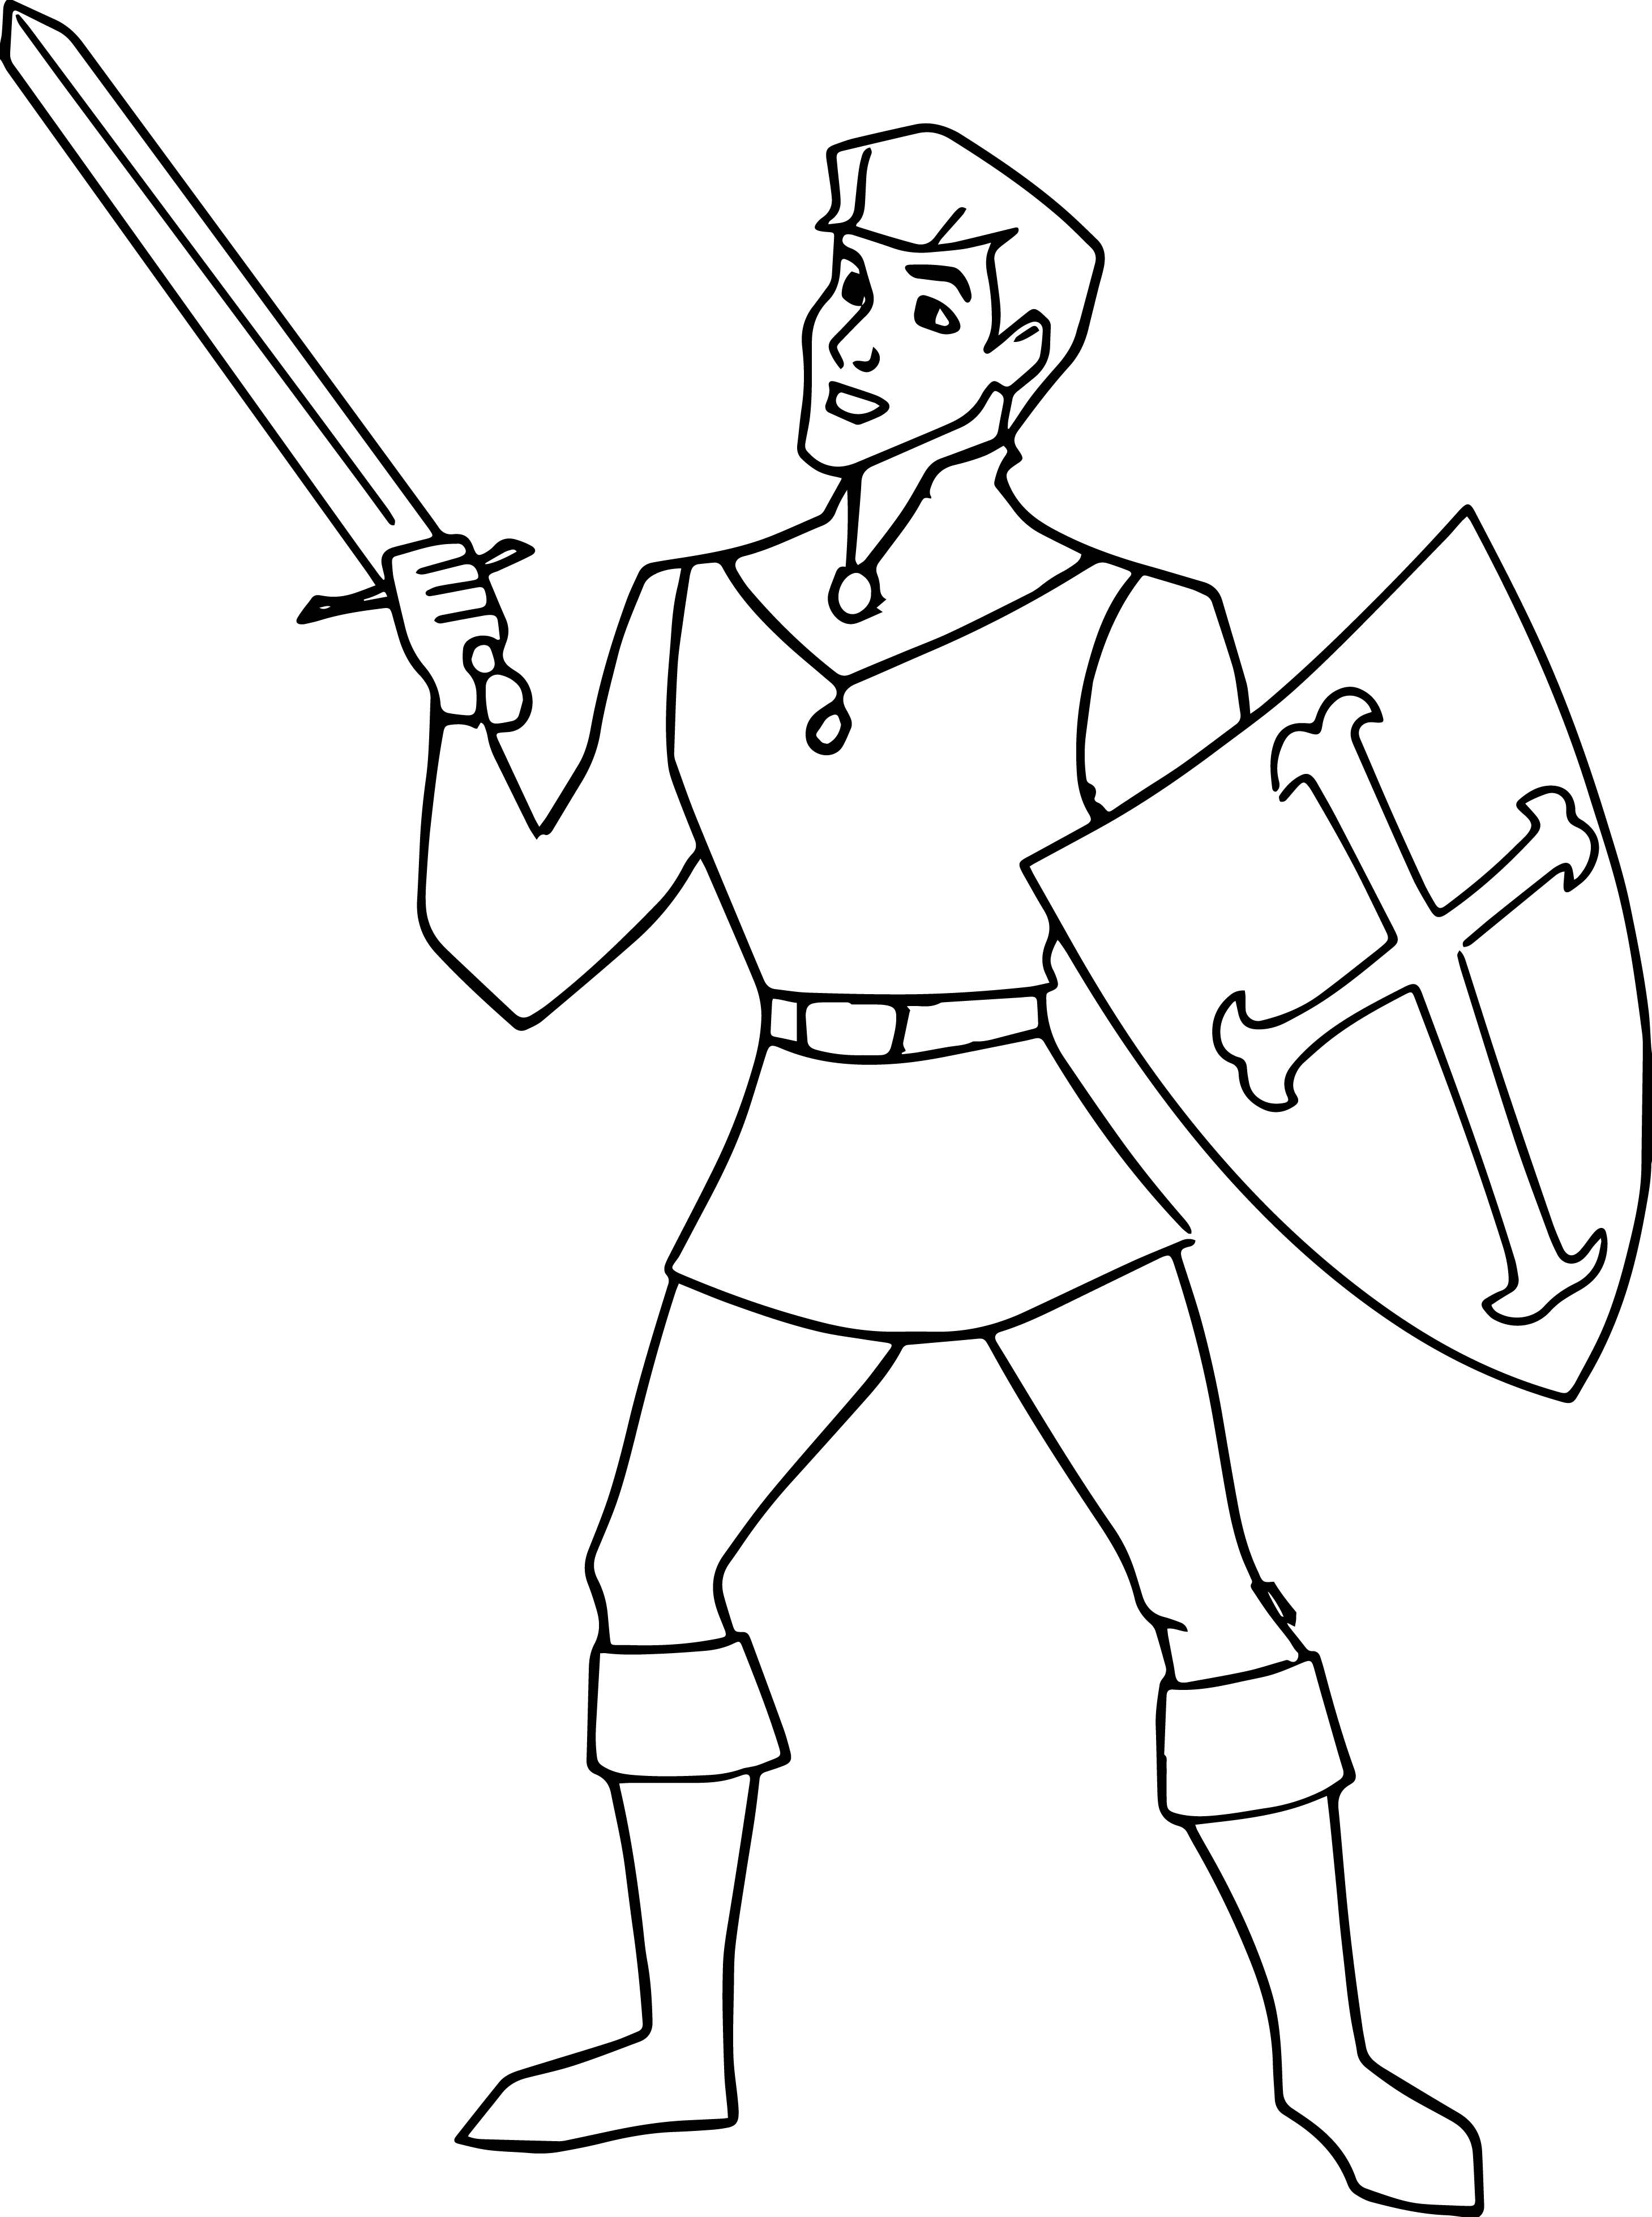 Phillip Sword Shield Coloring Pages | Coloring pages ...